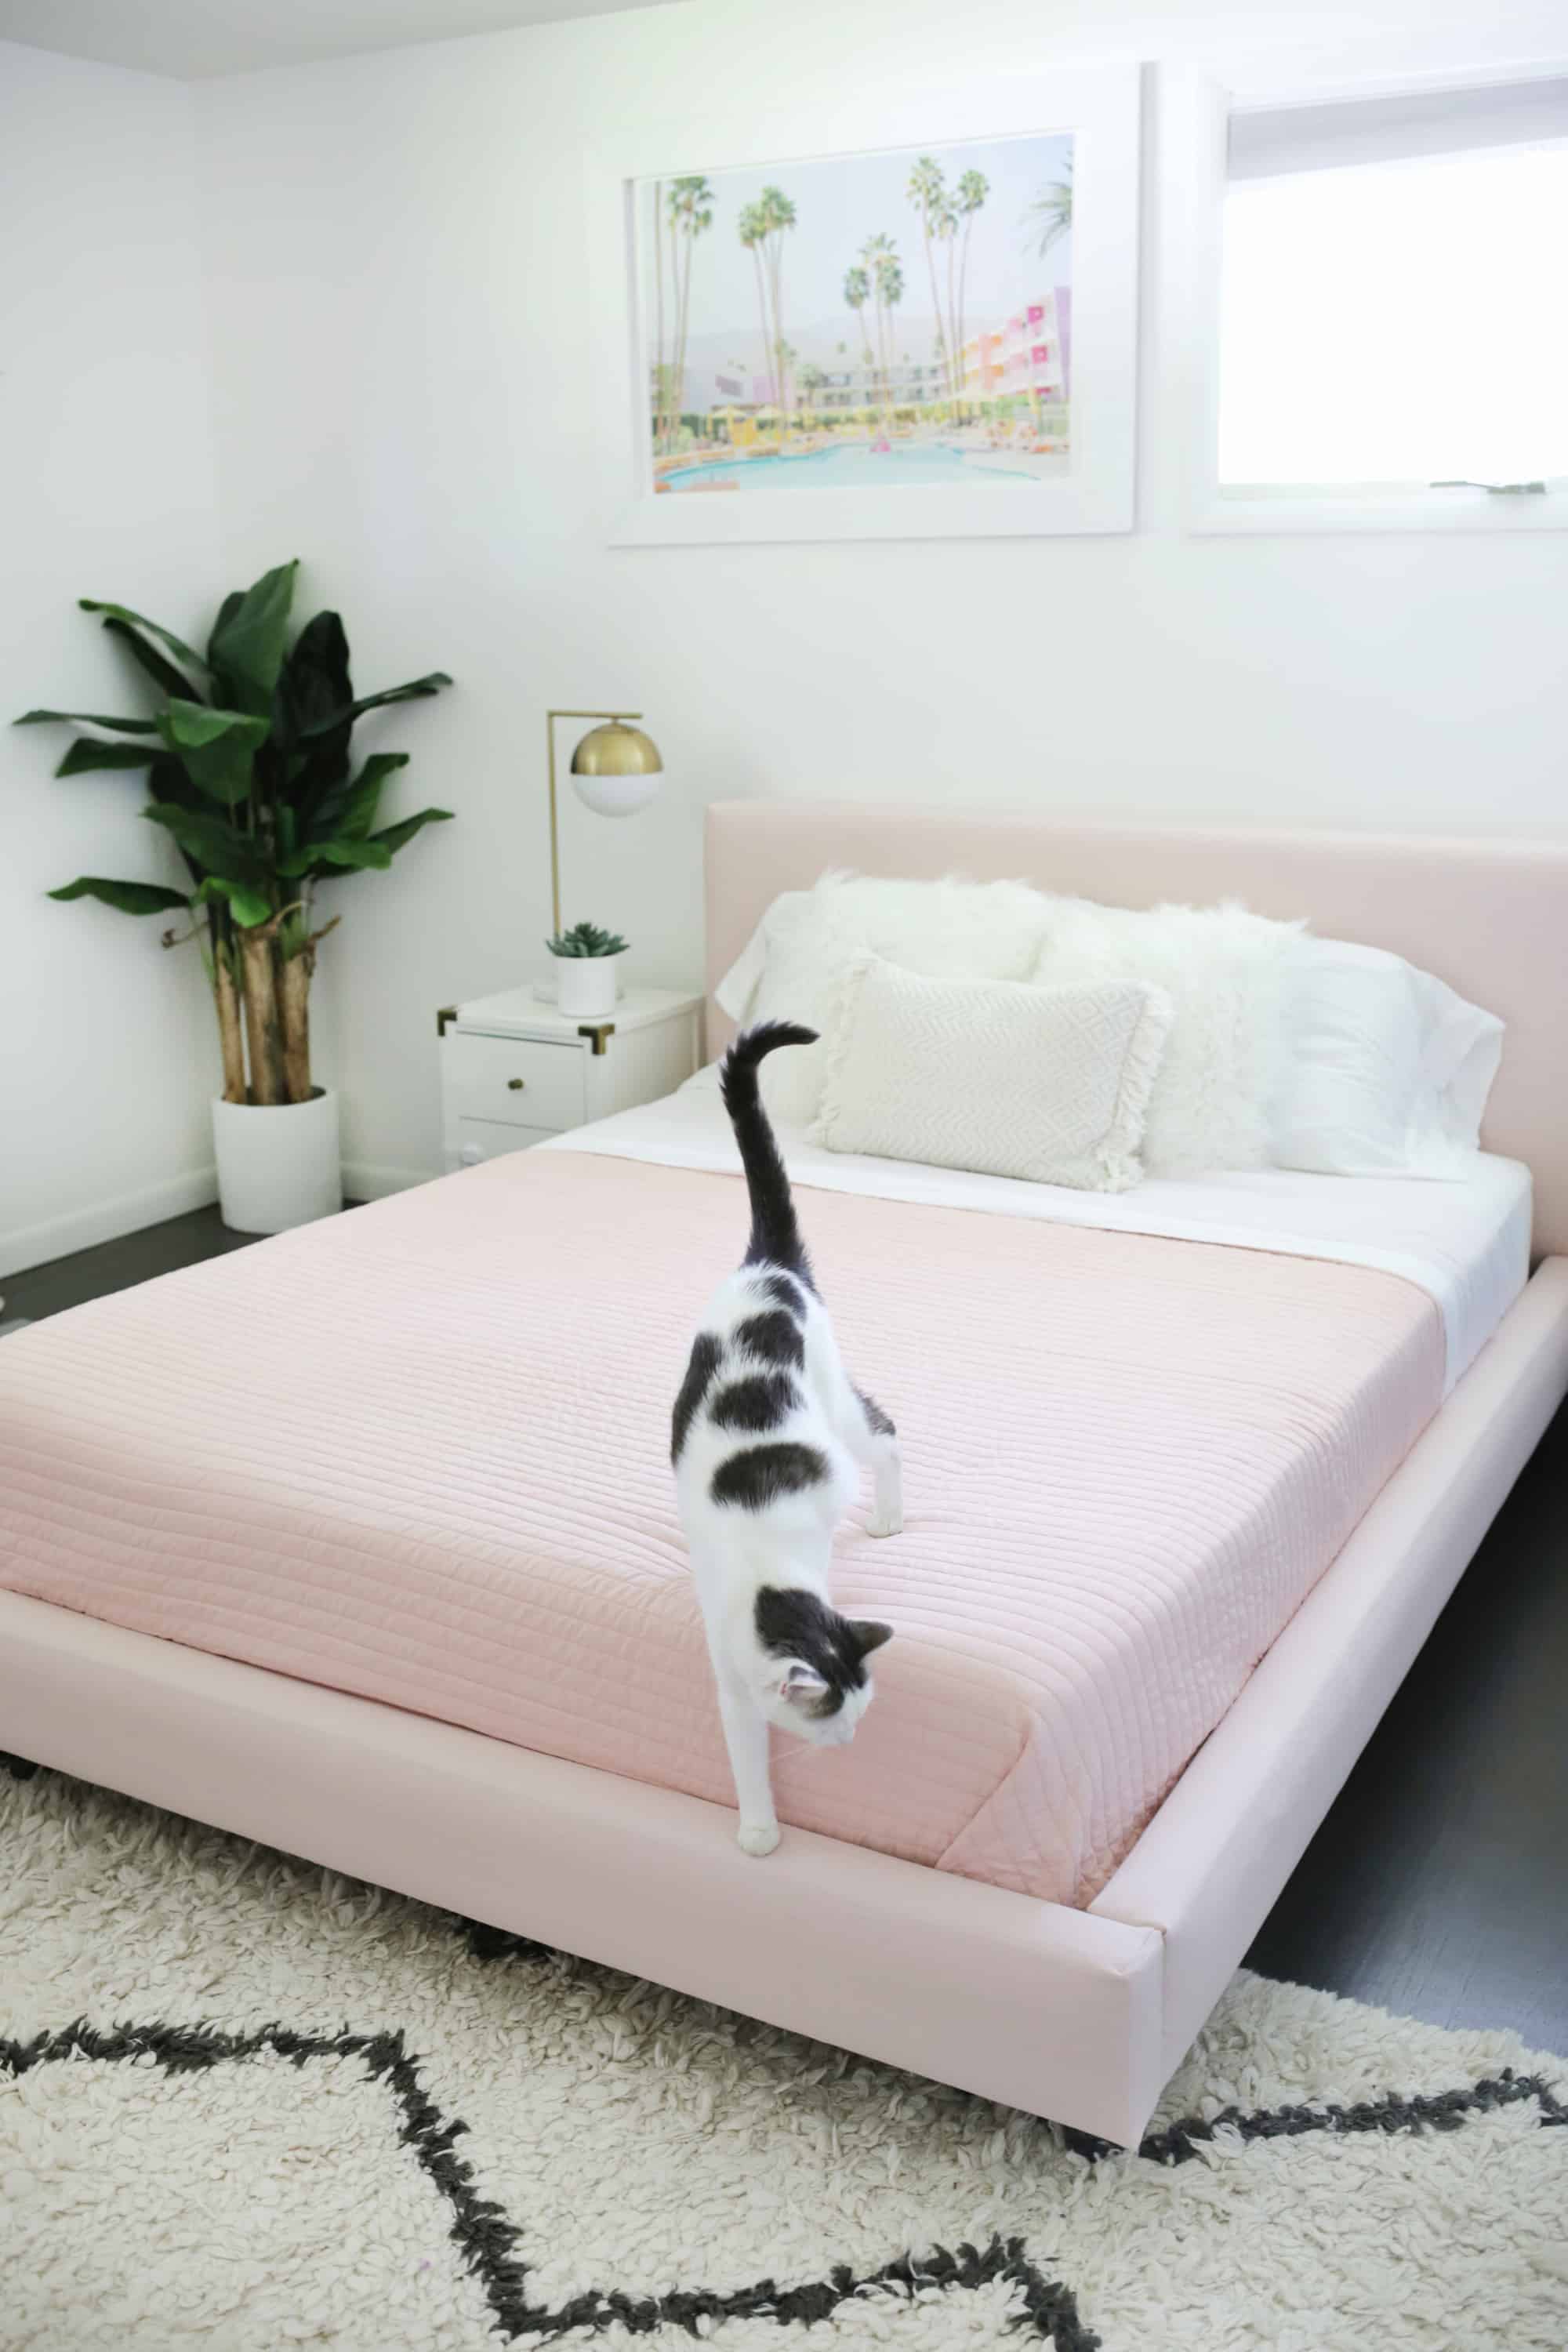 Reupholster Your Bed Frame In One, Platform Bed Frame You Can Attach Headboard To